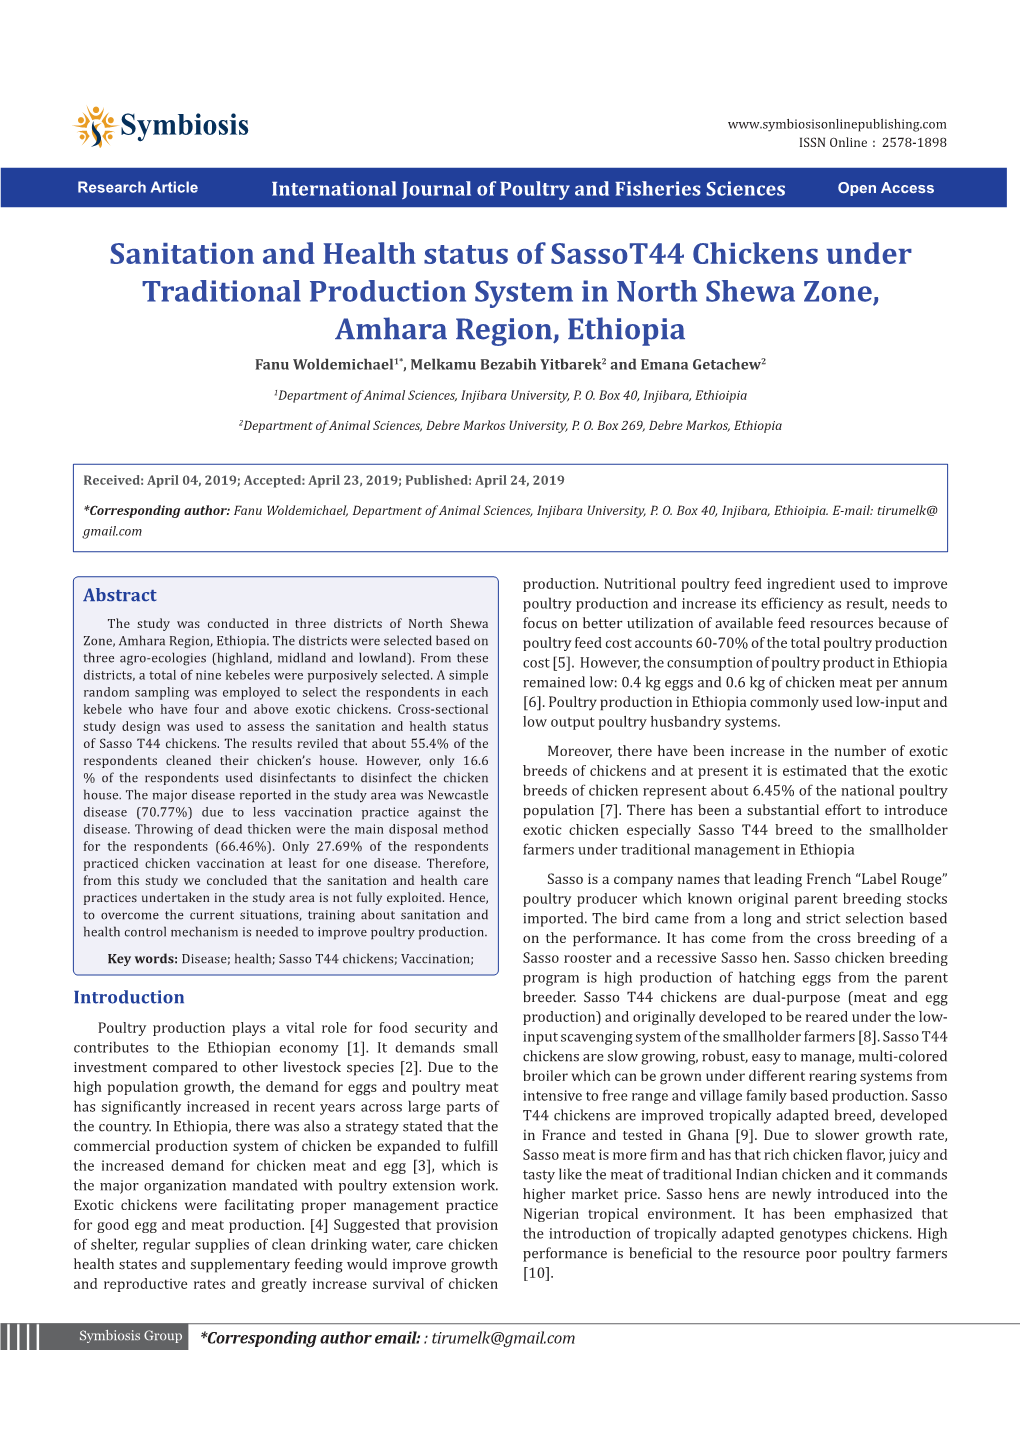 Sanitation and Health Status of Sassot44 Chickens Under Traditional Production System in North Shewa Zone, Amhara Region, Ethiop